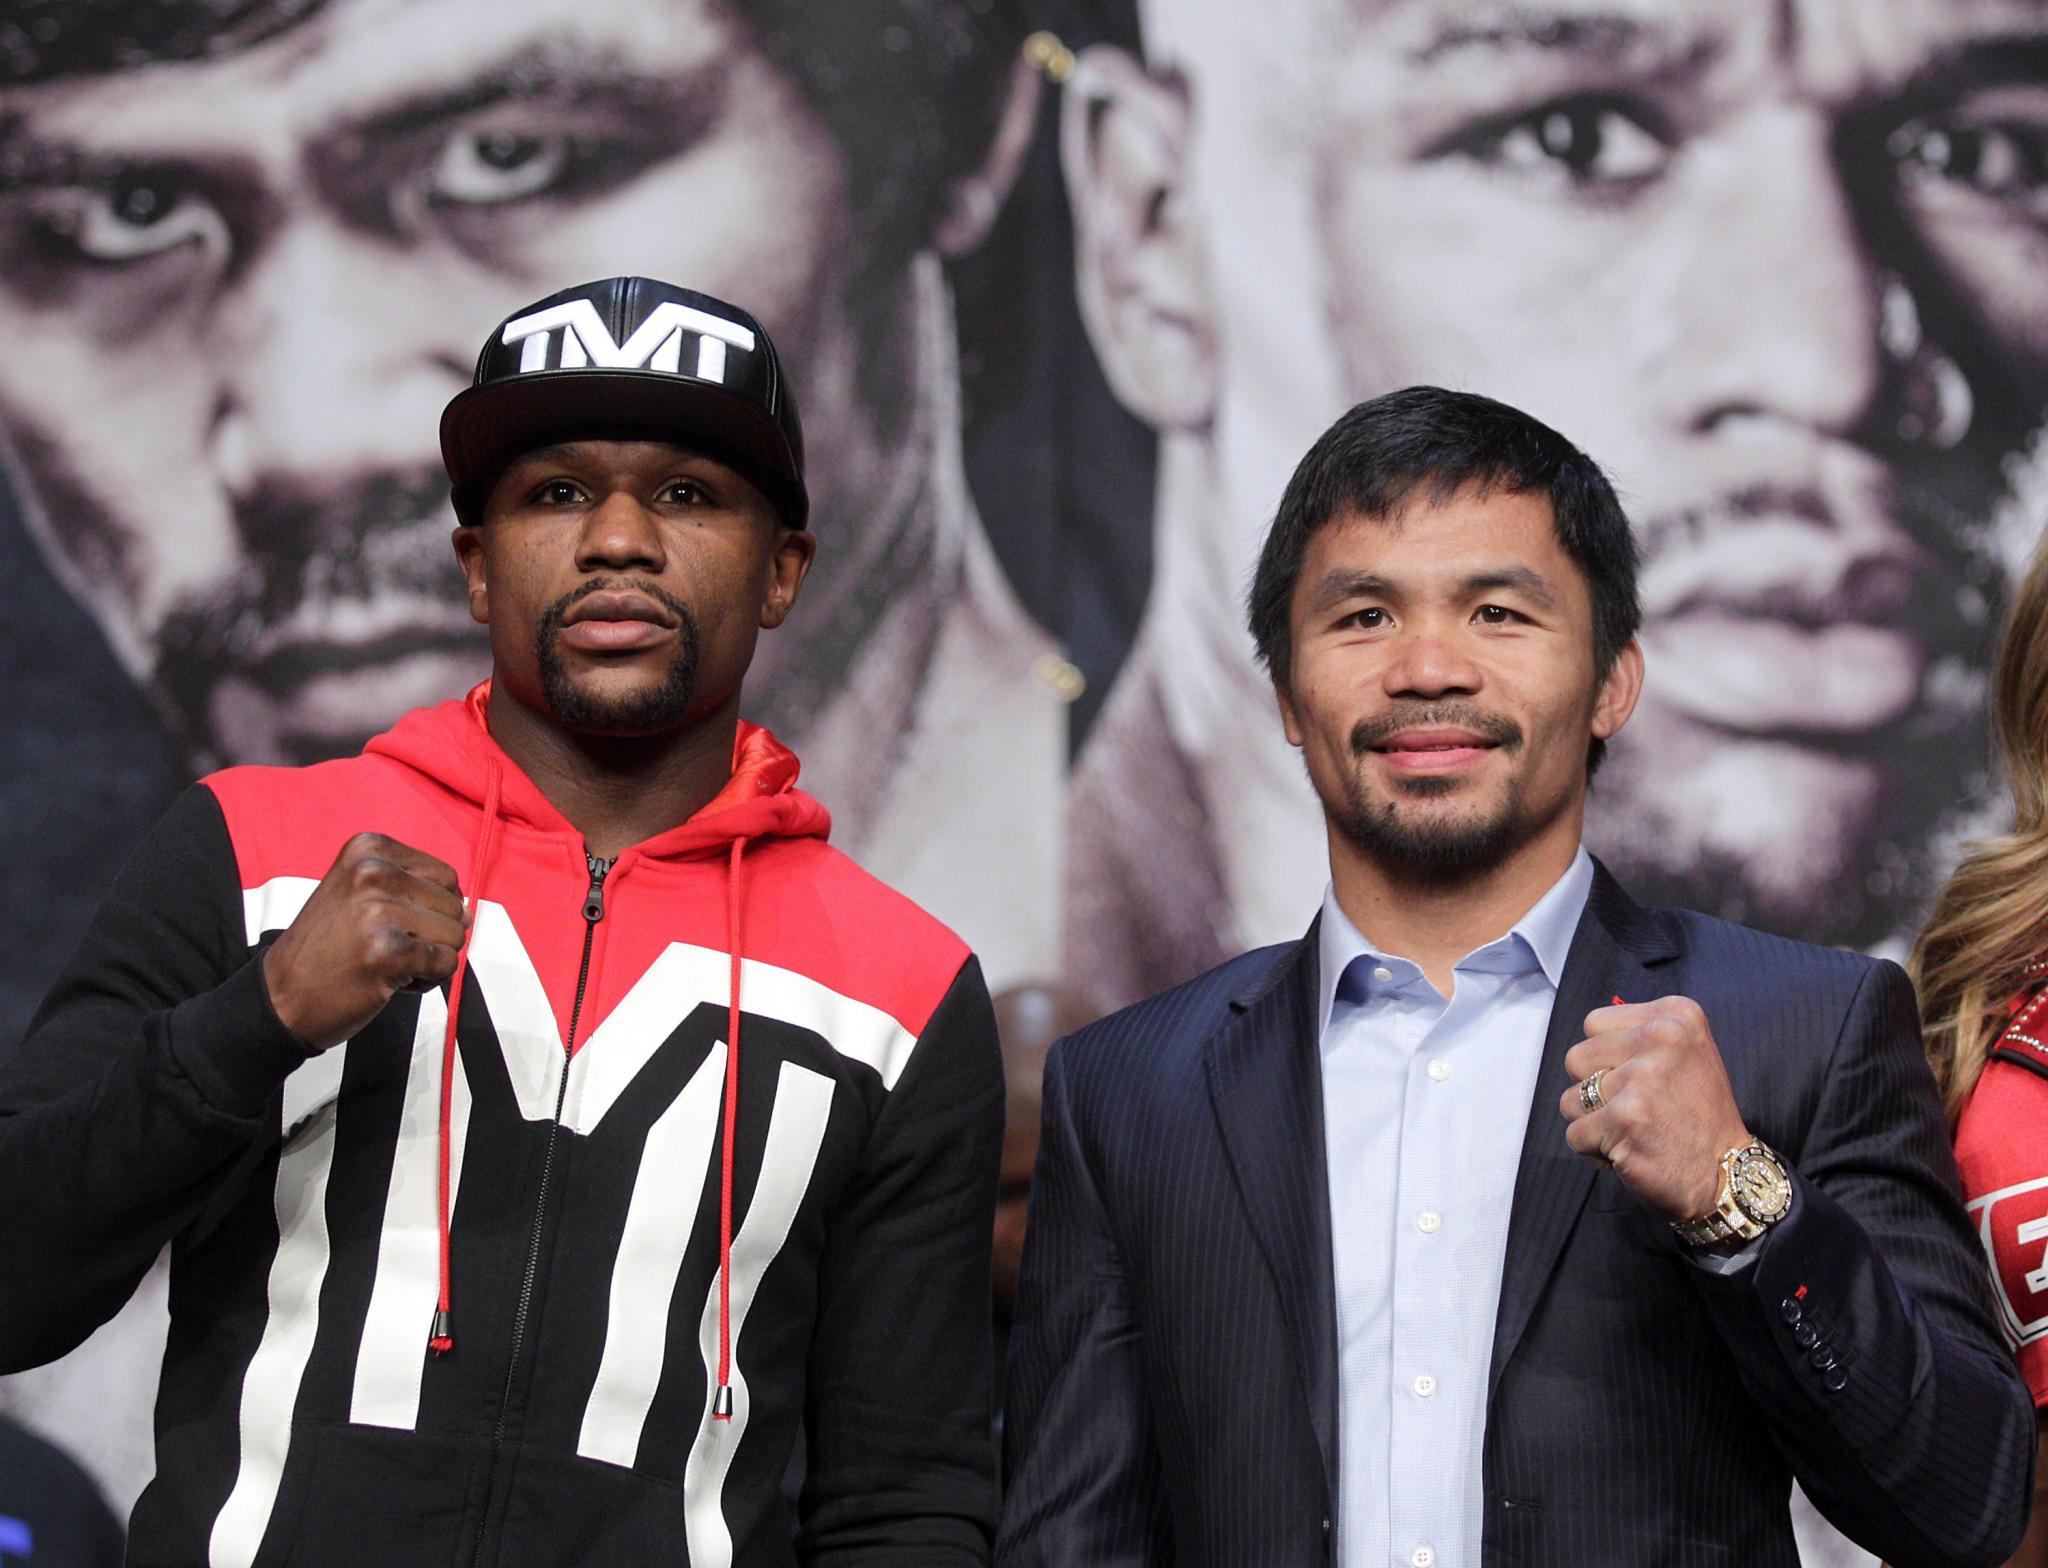 Will You Be Watching the Mayweather-Pacquiao Fight?